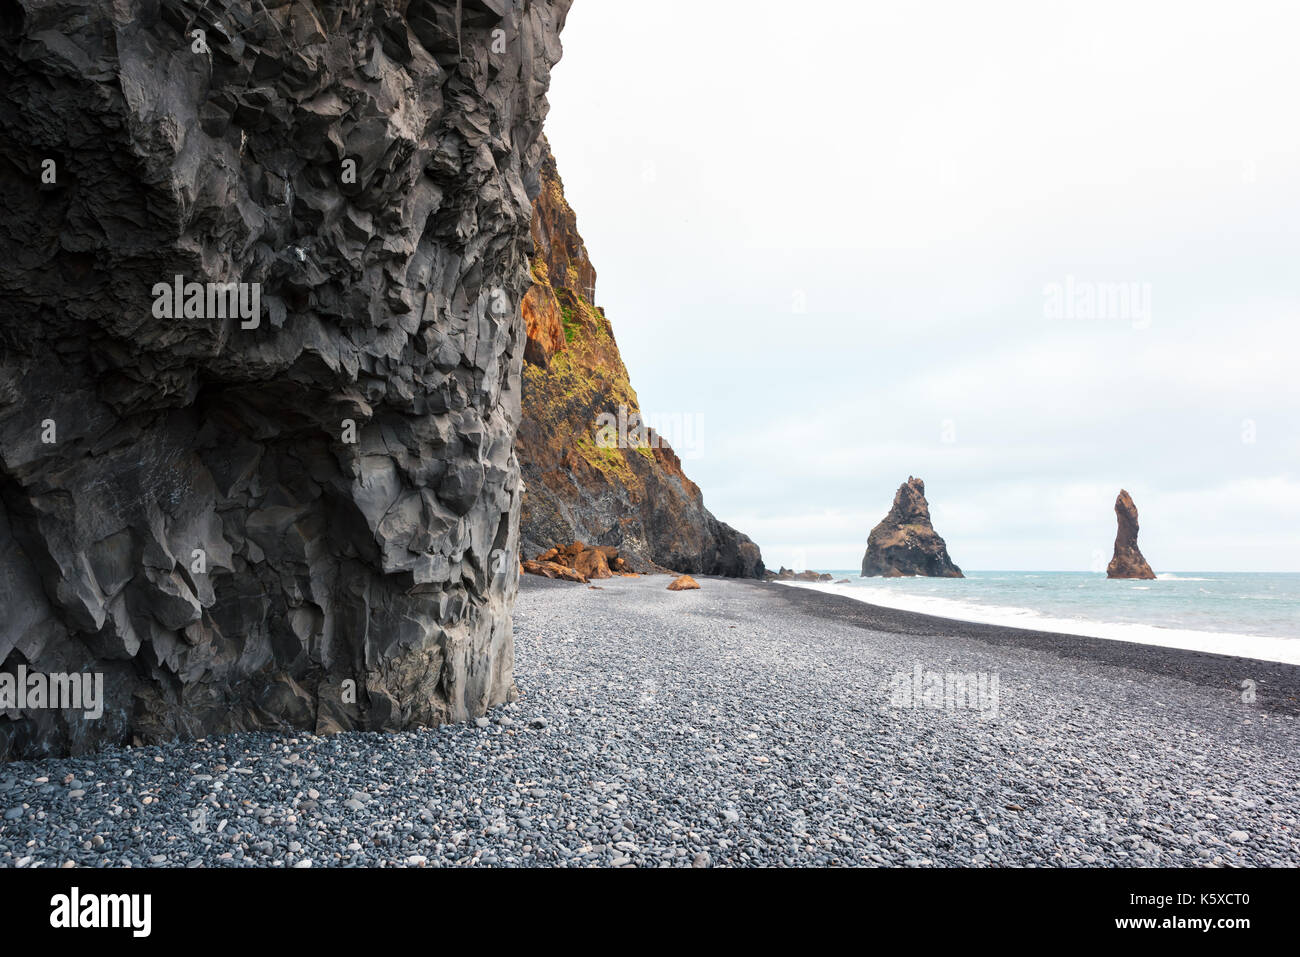 Basalt rock formations 'Troll toes' Stock Photo